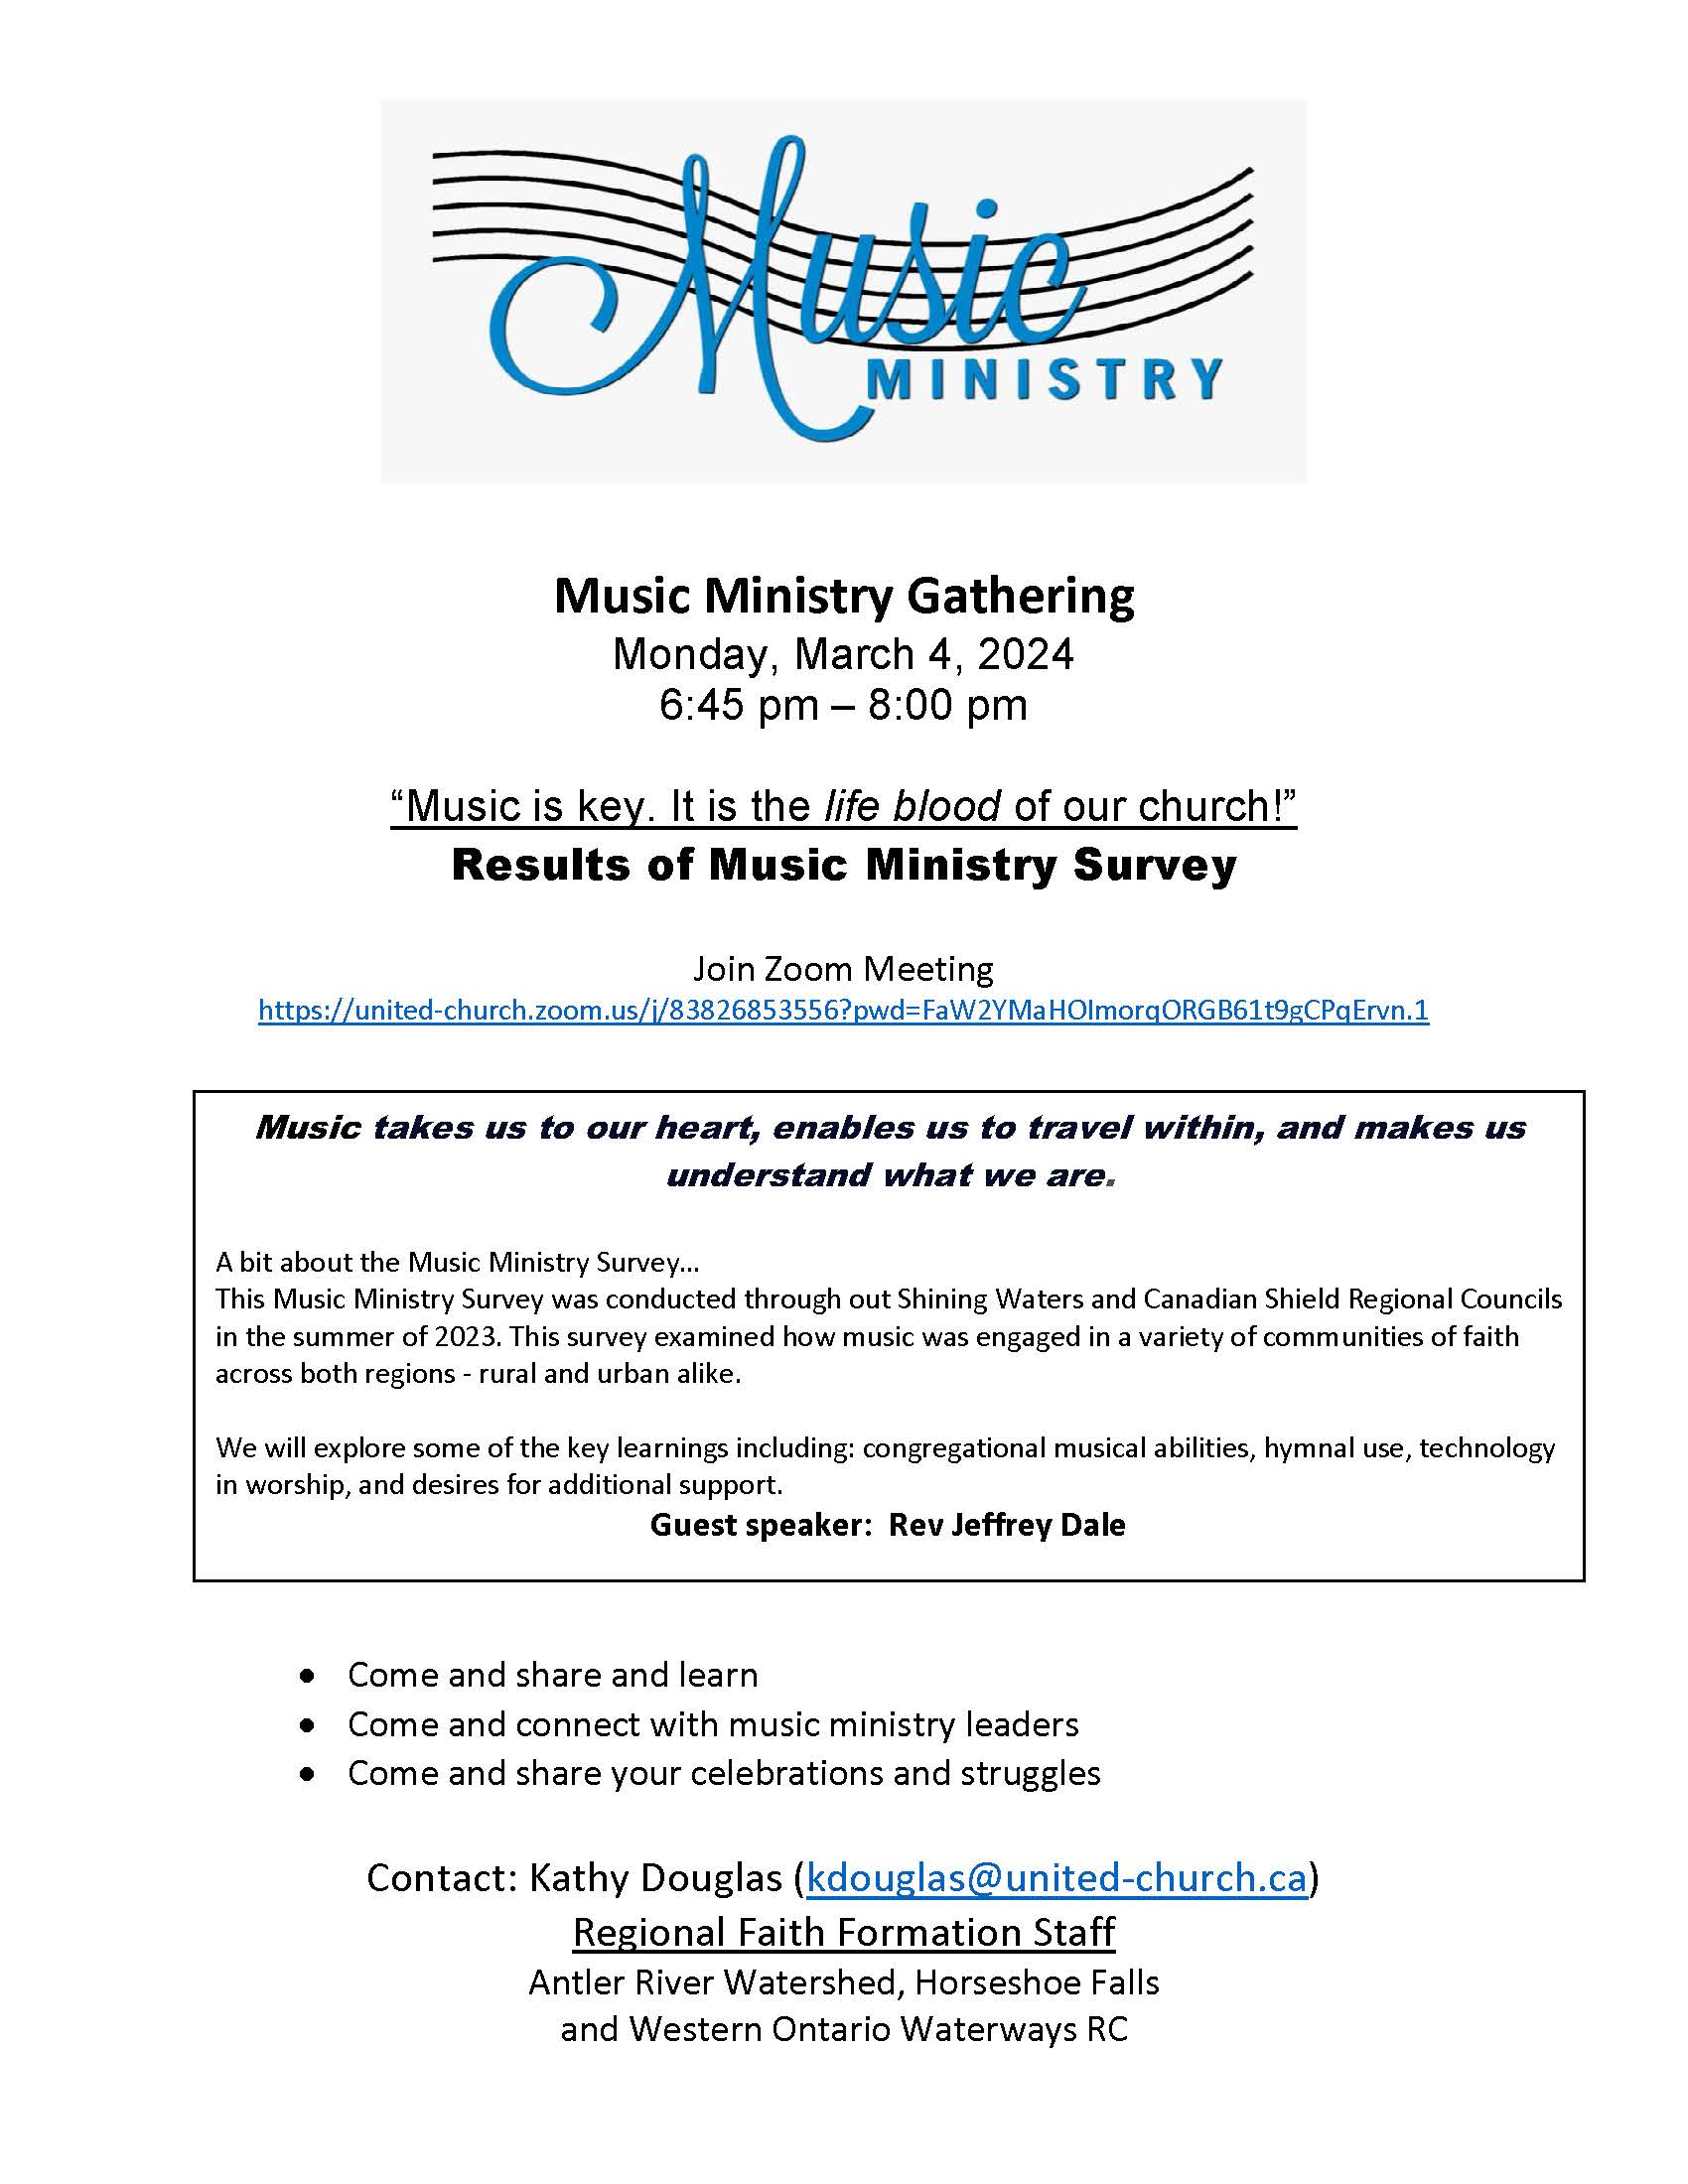 music scales promoting a music ministry gathering